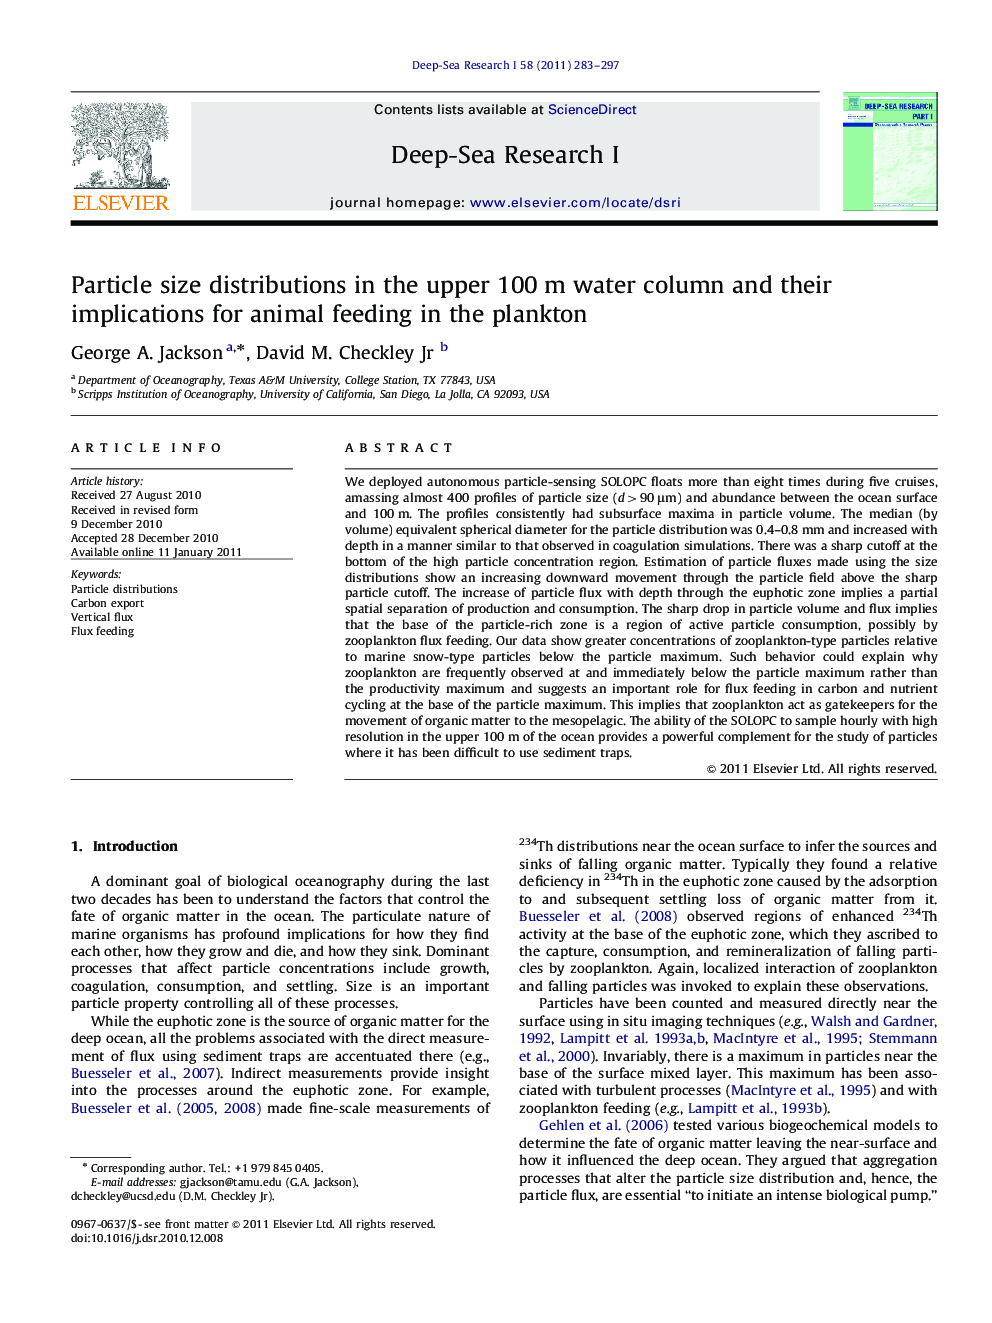 Particle size distributions in the upper 100 m water column and their implications for animal feeding in the plankton